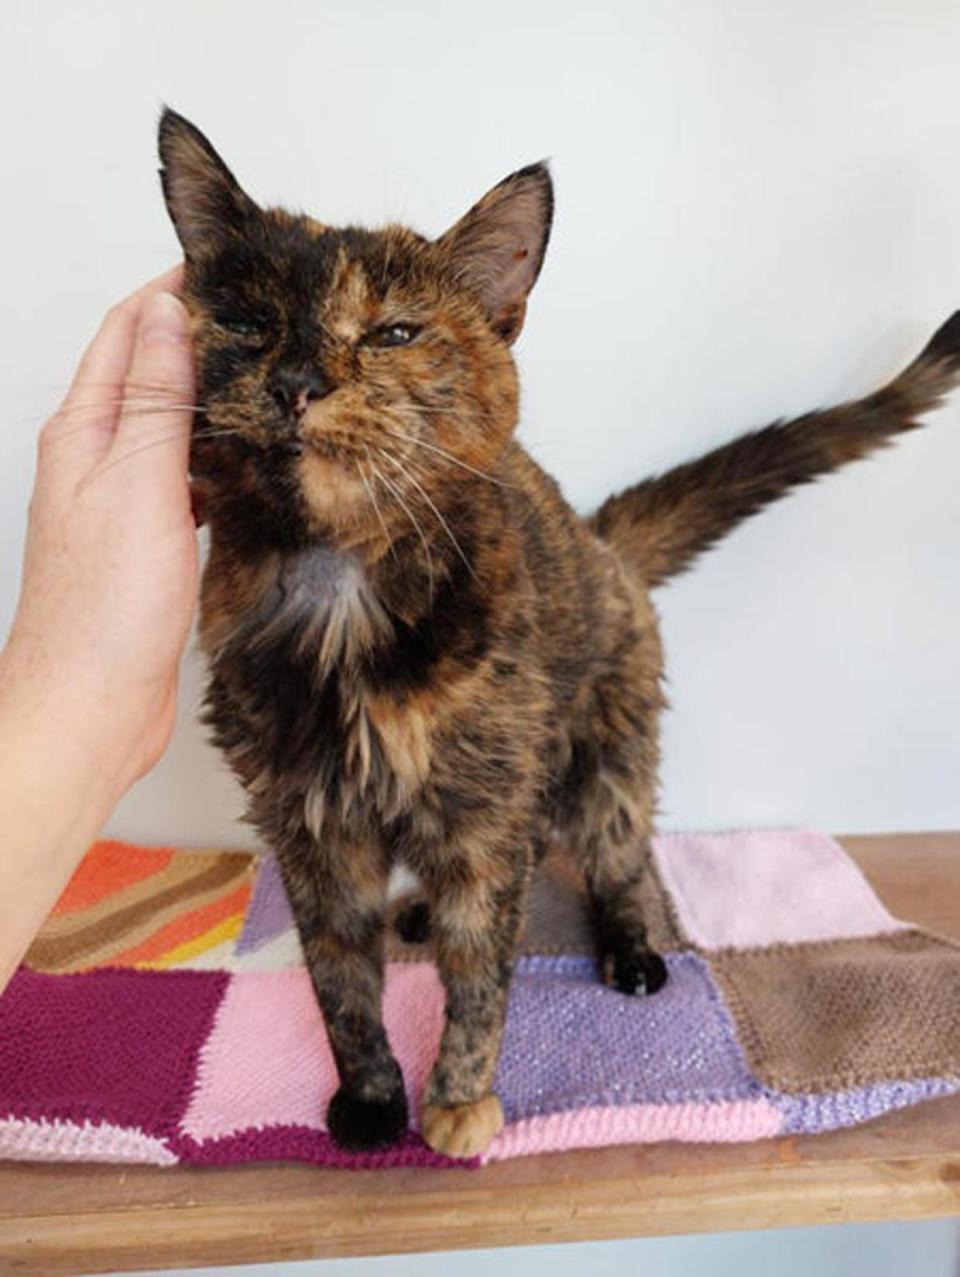 World's oldest living cat named Flossie, at nearly 27 she's survived